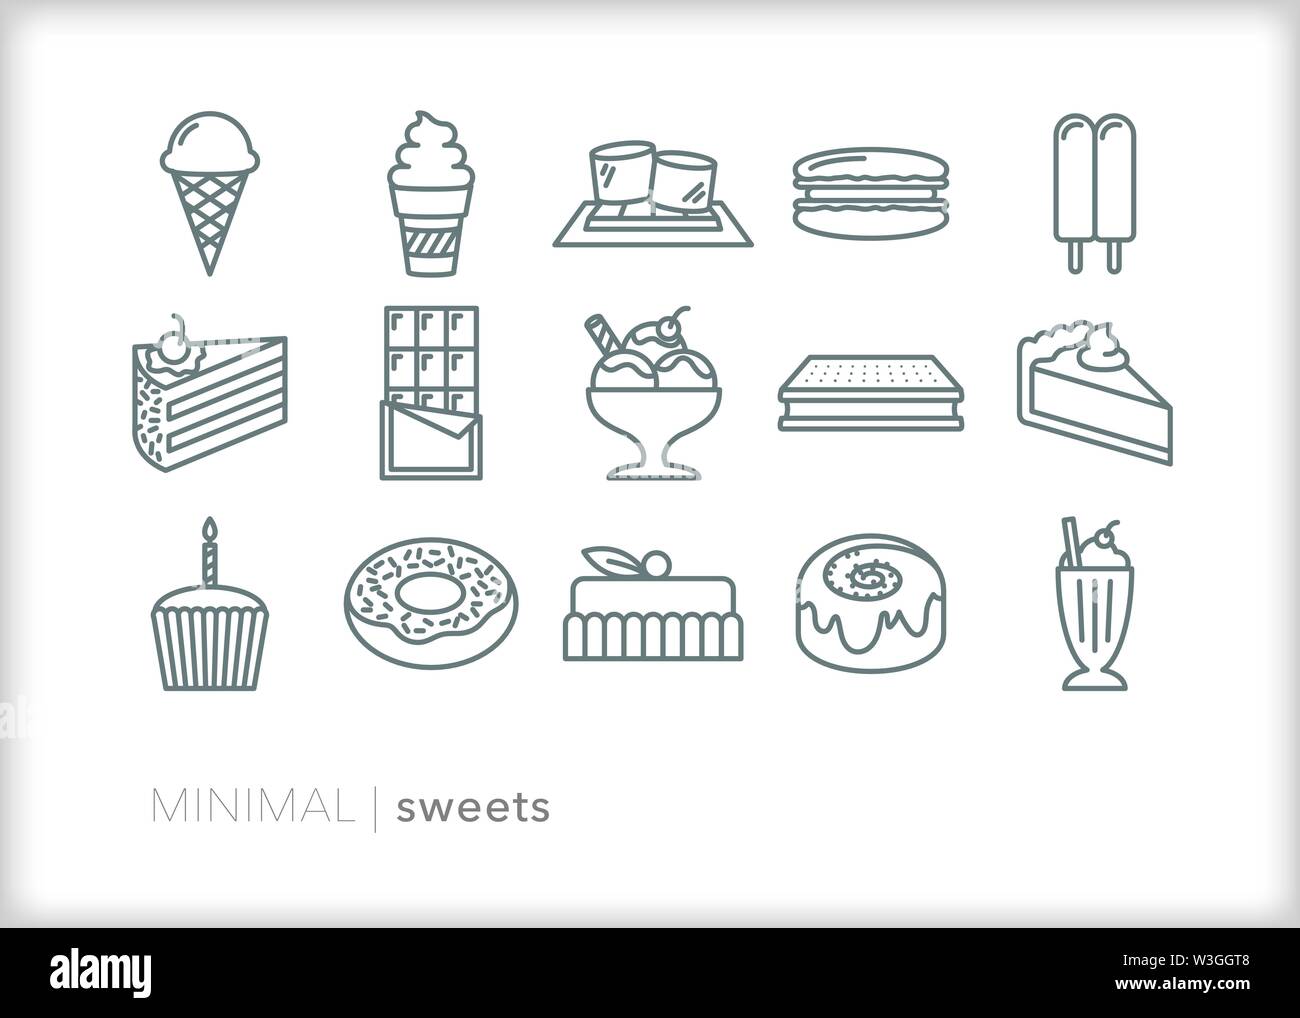 Set of 15 sweet dessert or treat food line icons Stock Vector